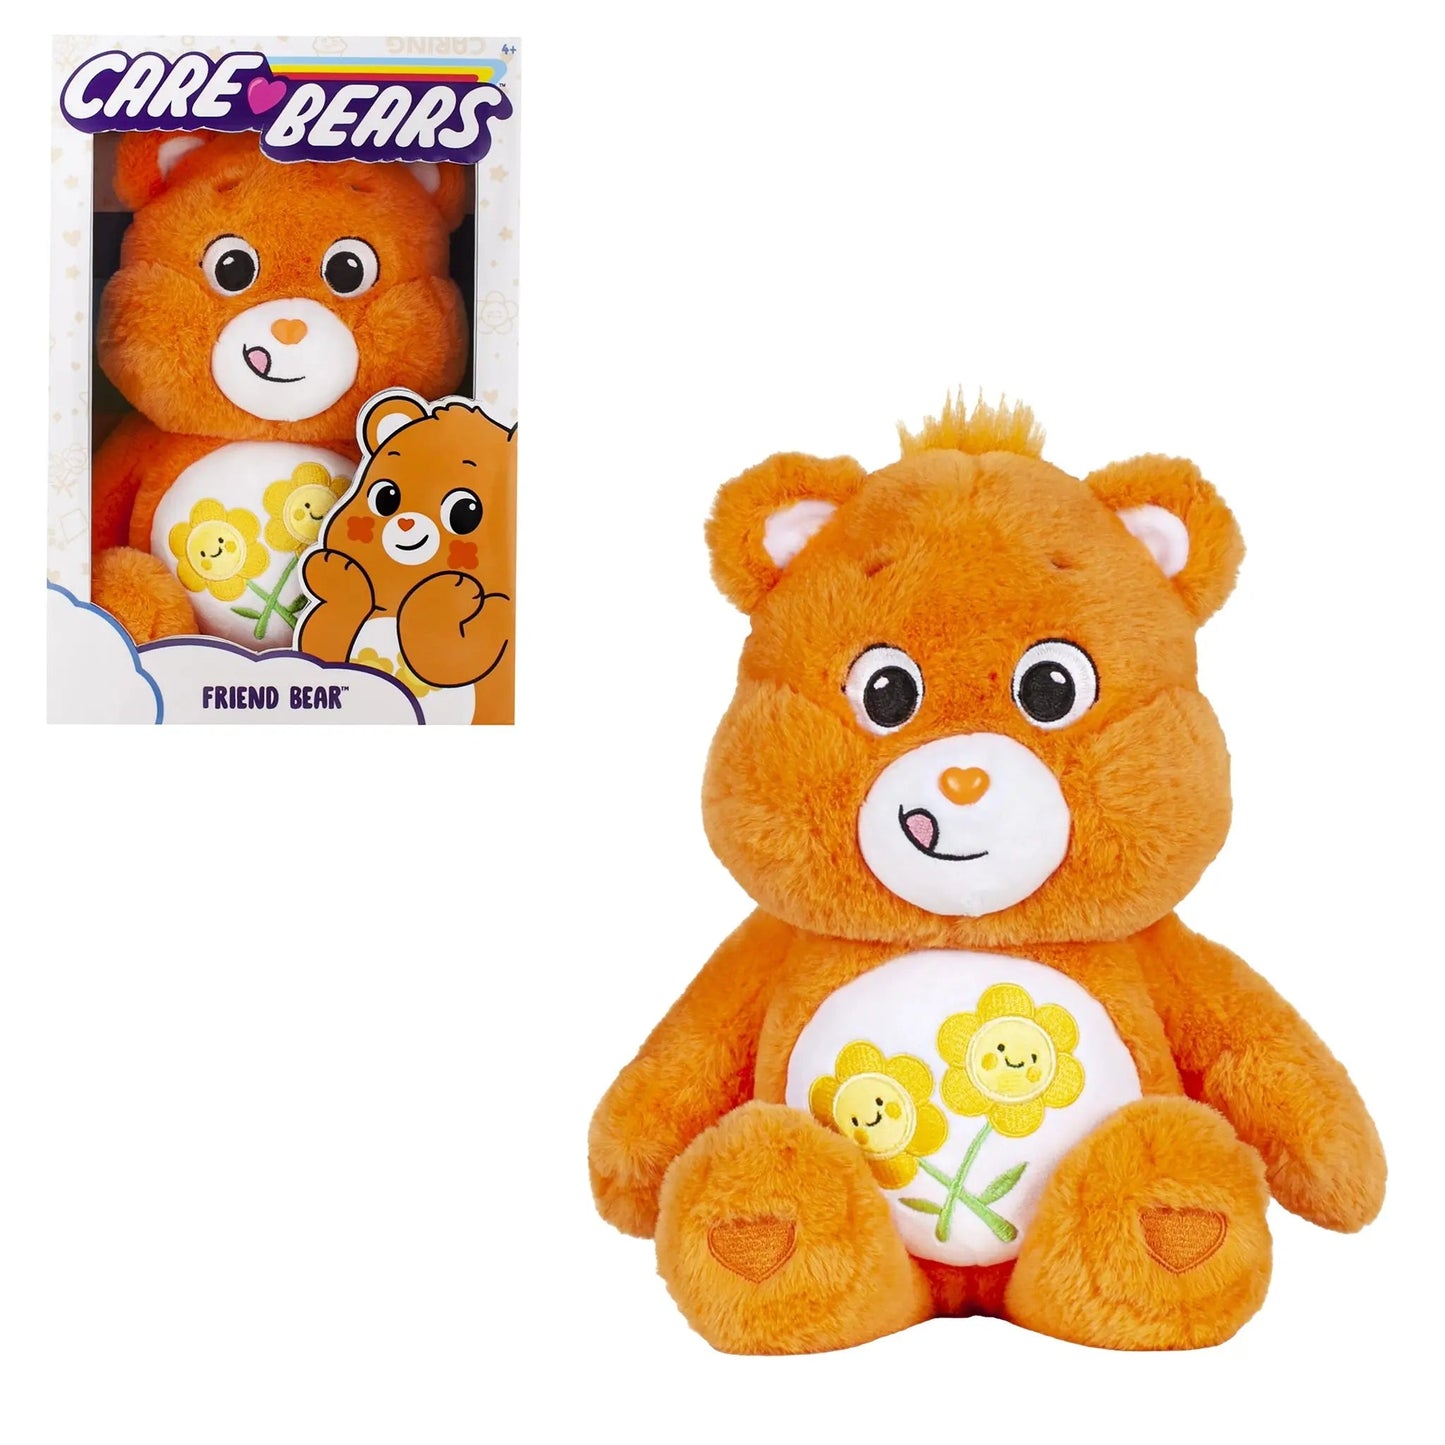 Care Bears 14" - Friend Bear - ABGee - The Forgotten Toy Shop